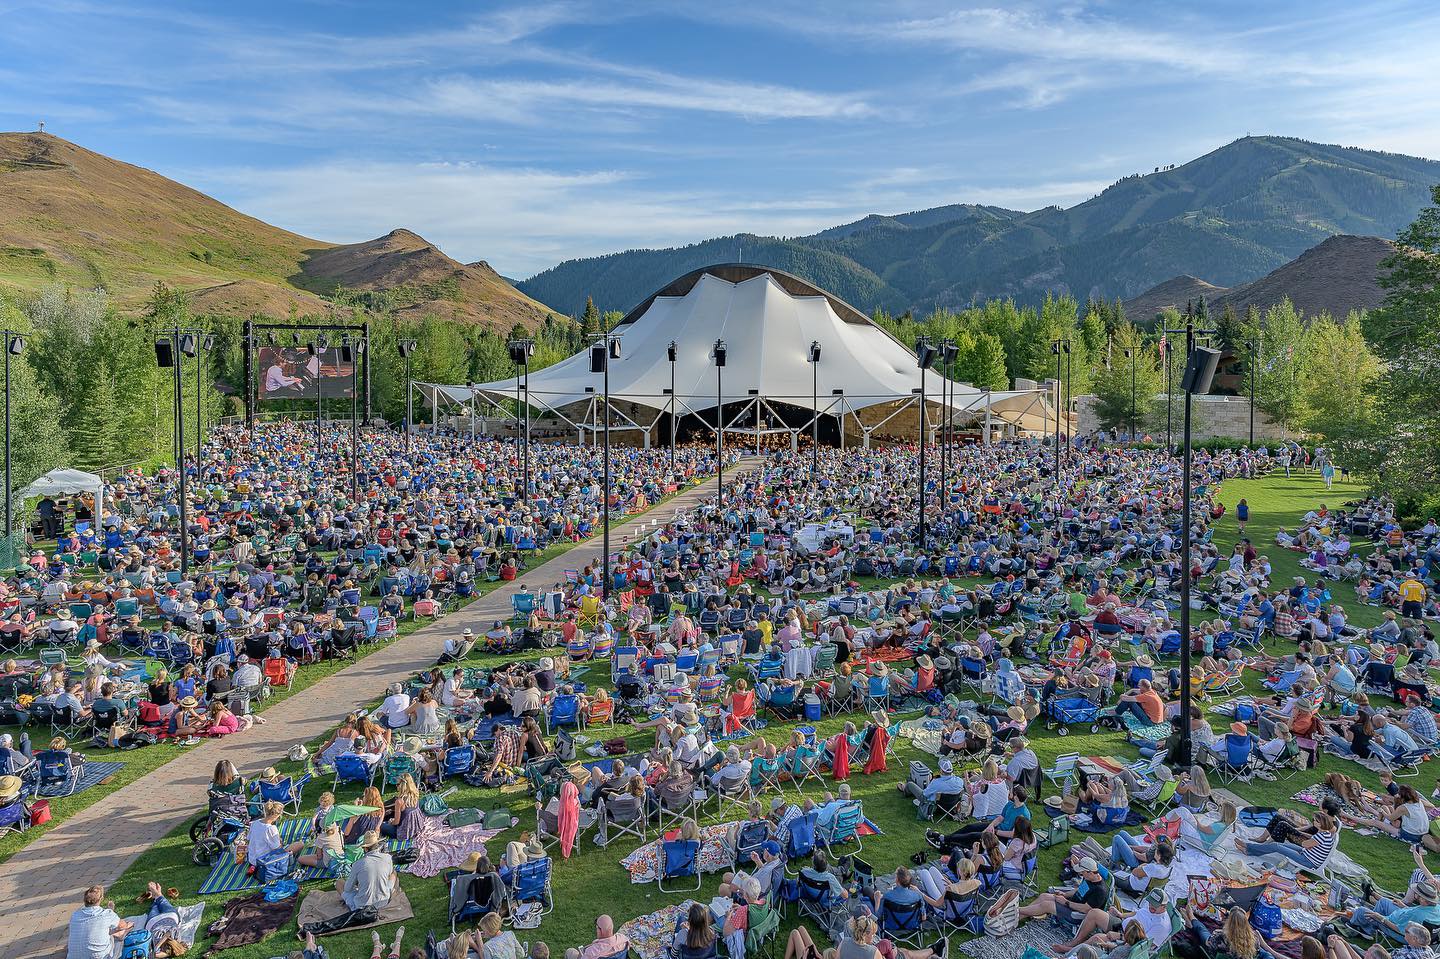 The Sun Valley Music Festival summer selection for 2022, July 24-August 18, offers an astounding schedule of 15 concerts, which includes the Gala, with pieces ranging from Strauss’s “An Alpine Symphony and familiar works by Beethoven, Brahms, and Tchaikovsky to 20th-century treasures by Lili Boulanger and Stravinsky to a particular emphasis on music by living composers. Read more in July SVPN Magazine. @svpnmagazine @svmusicfestival @sunvalley #svpnmagazine #sunvalleymusicfestival #sunvalleyidaho #sunvalleysymphony #sunvalleypavilion